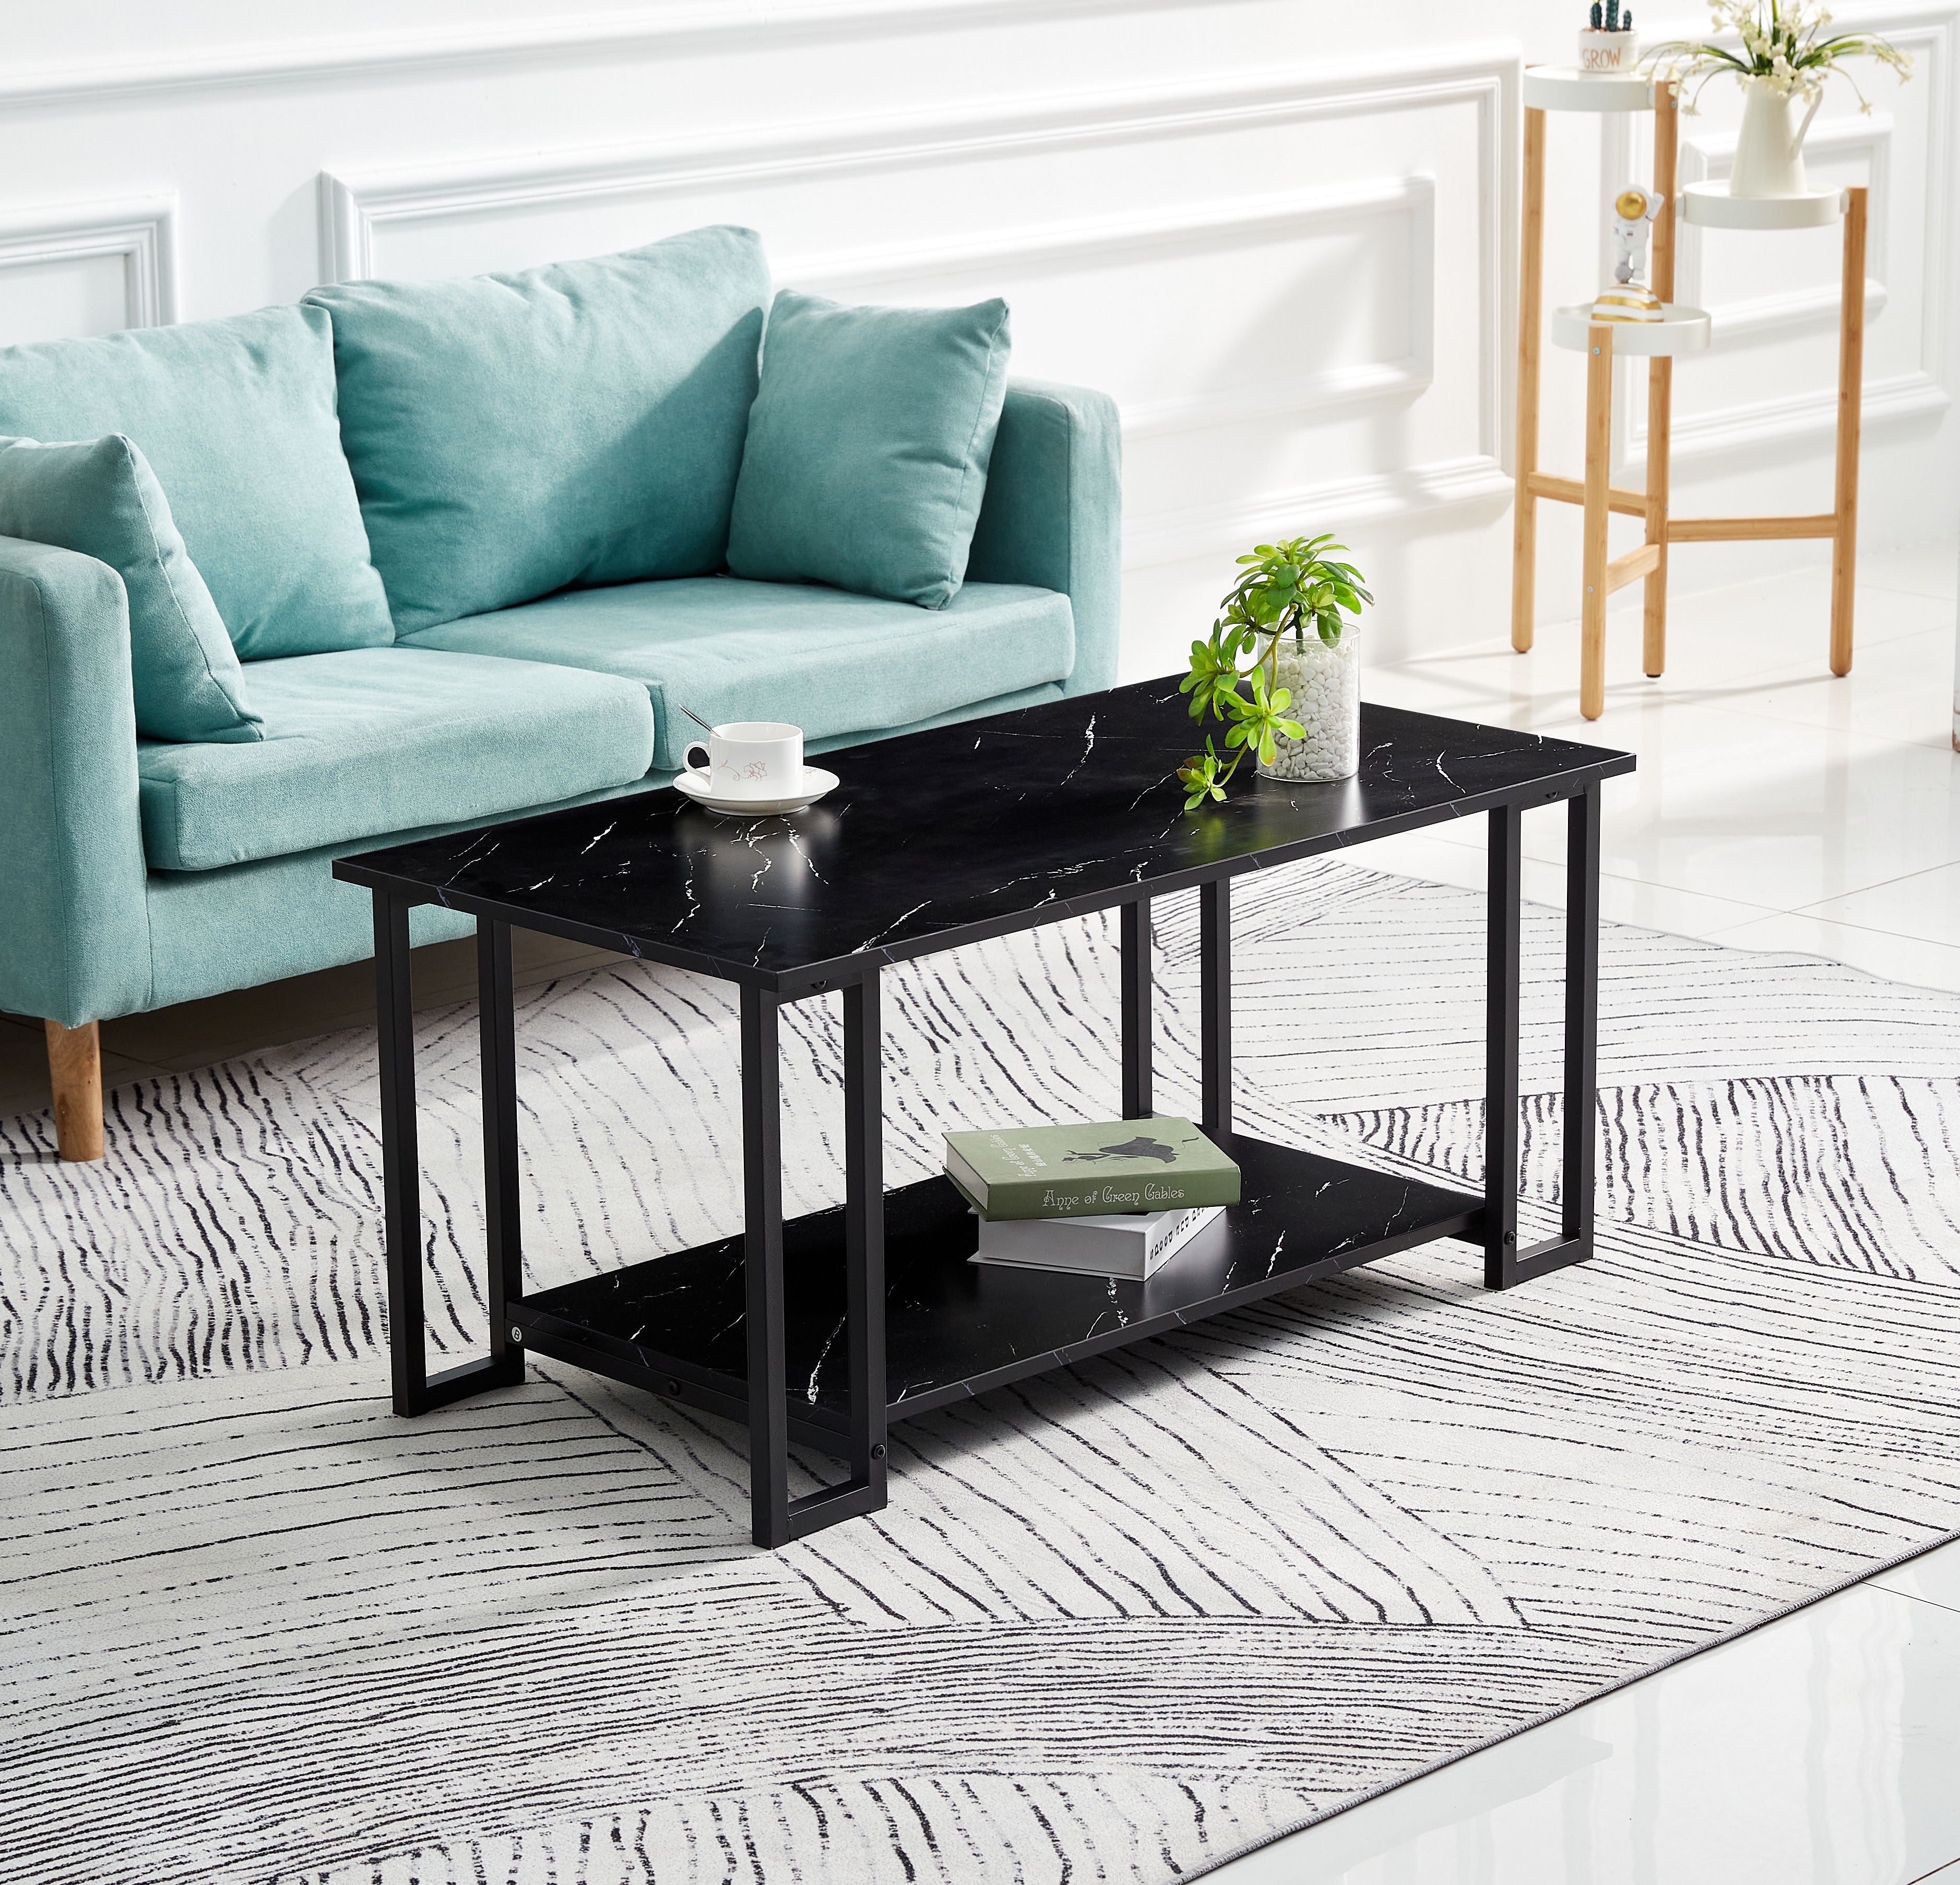 D & N Coffee Table, 2 Layers 1.5Cm Thick Marble MDF Rectangle 39.37" L Tabletop Iron Coffee Table, Dining Room - Black Top - Black Leg